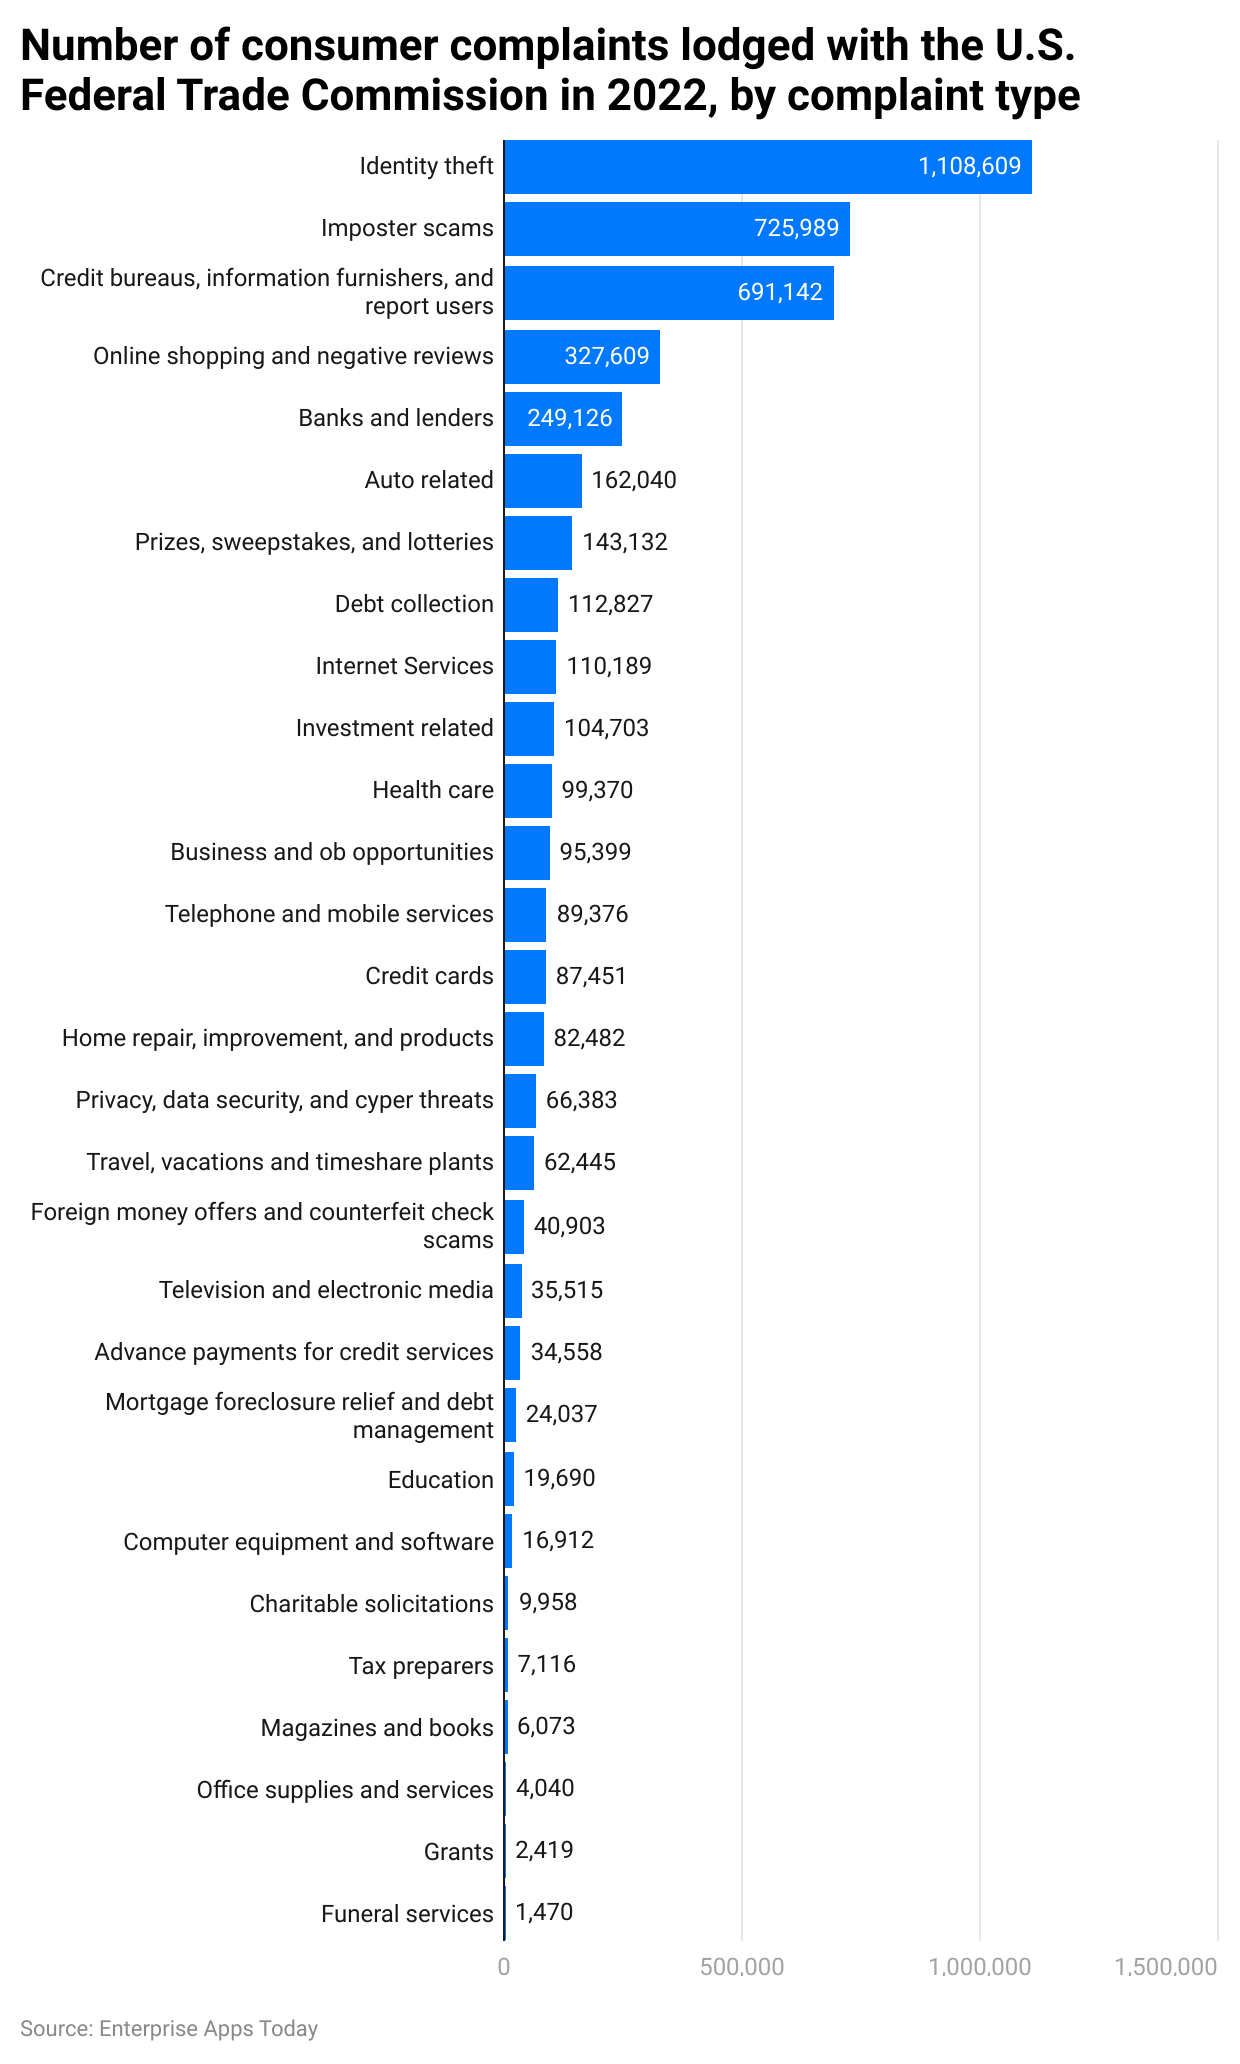 number-of-consumer-complaints-lodged-with-the-u-s-federal-trade-commission-in-2022-by-complaint-type